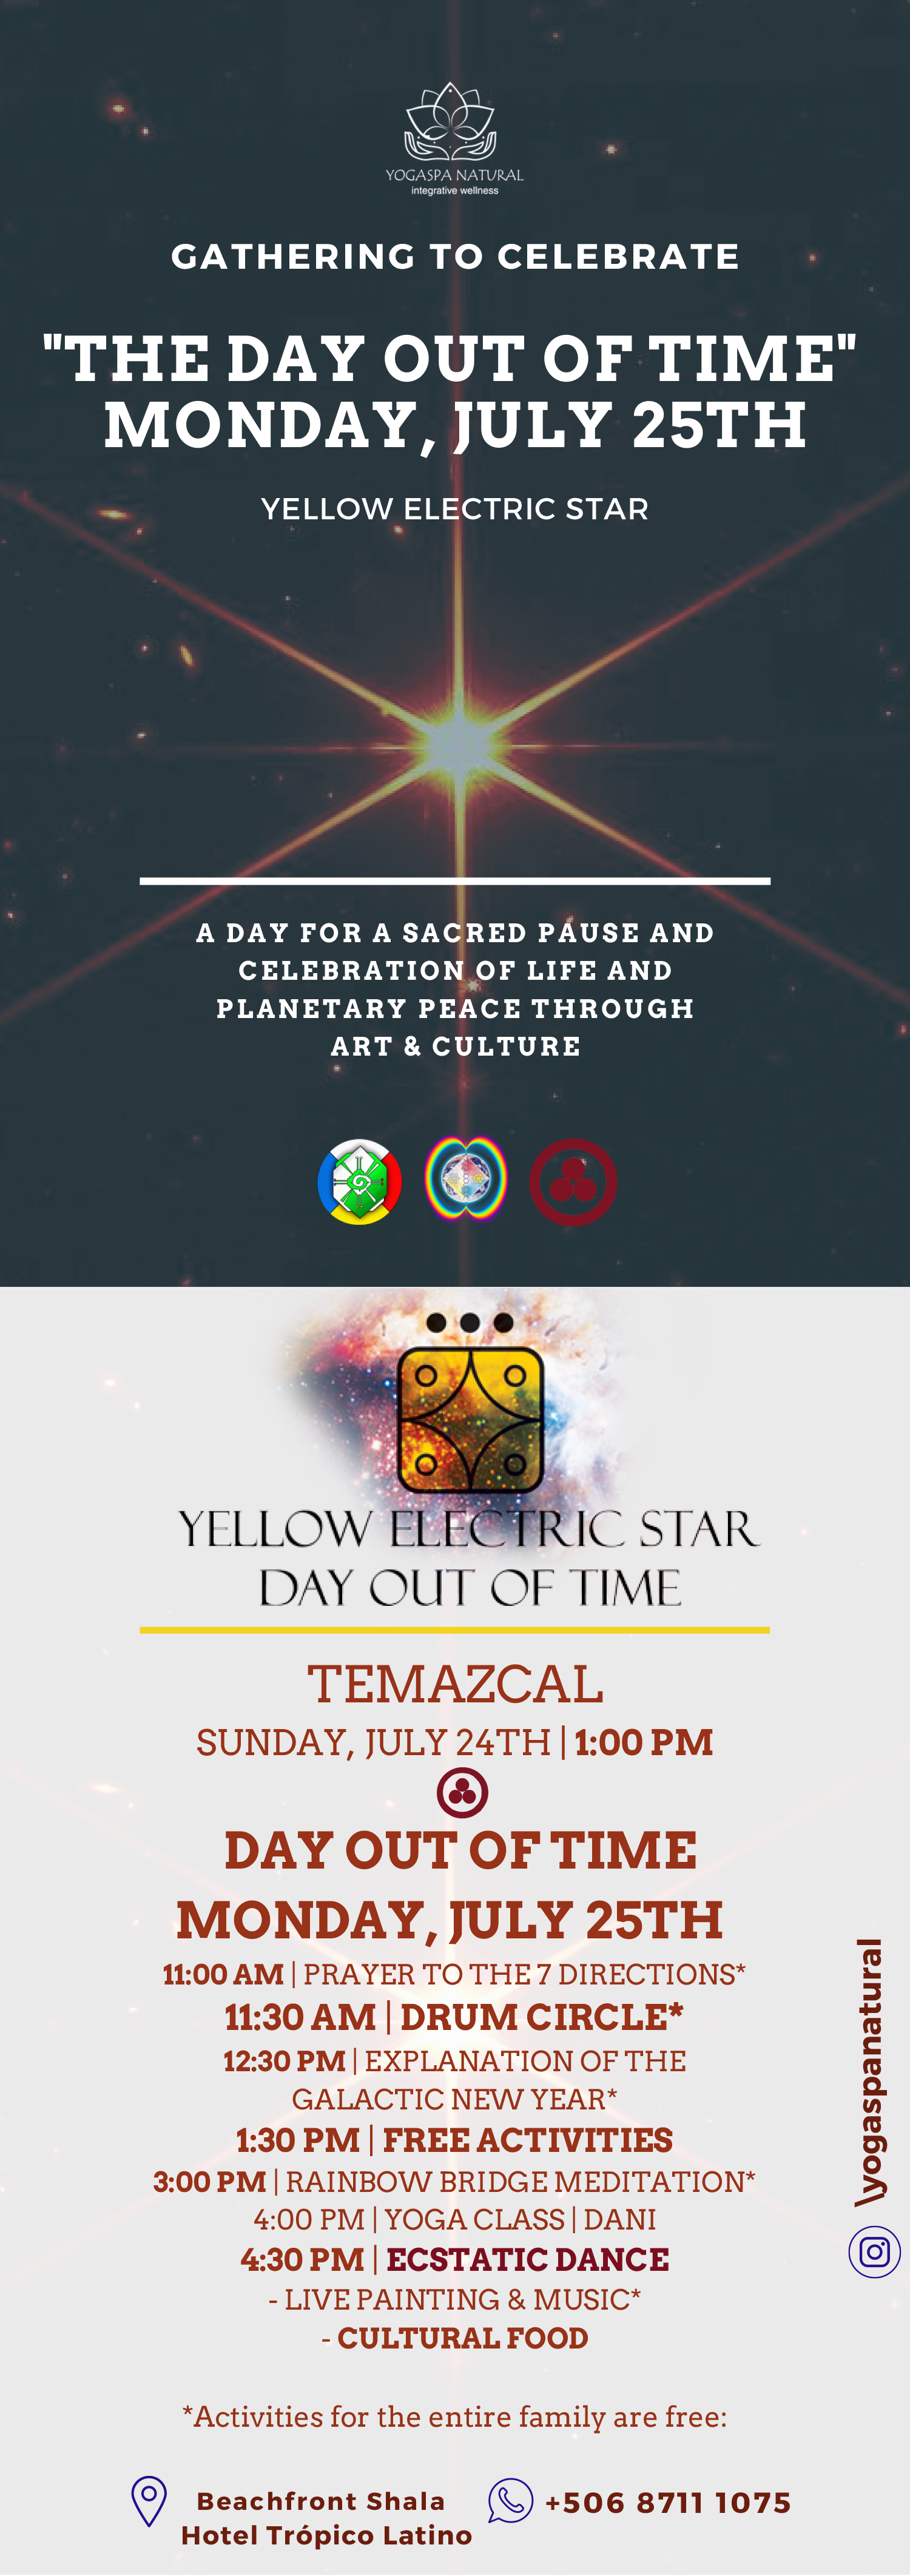 Global Day Out of Time Events! Yellow Electric Star Foundation for